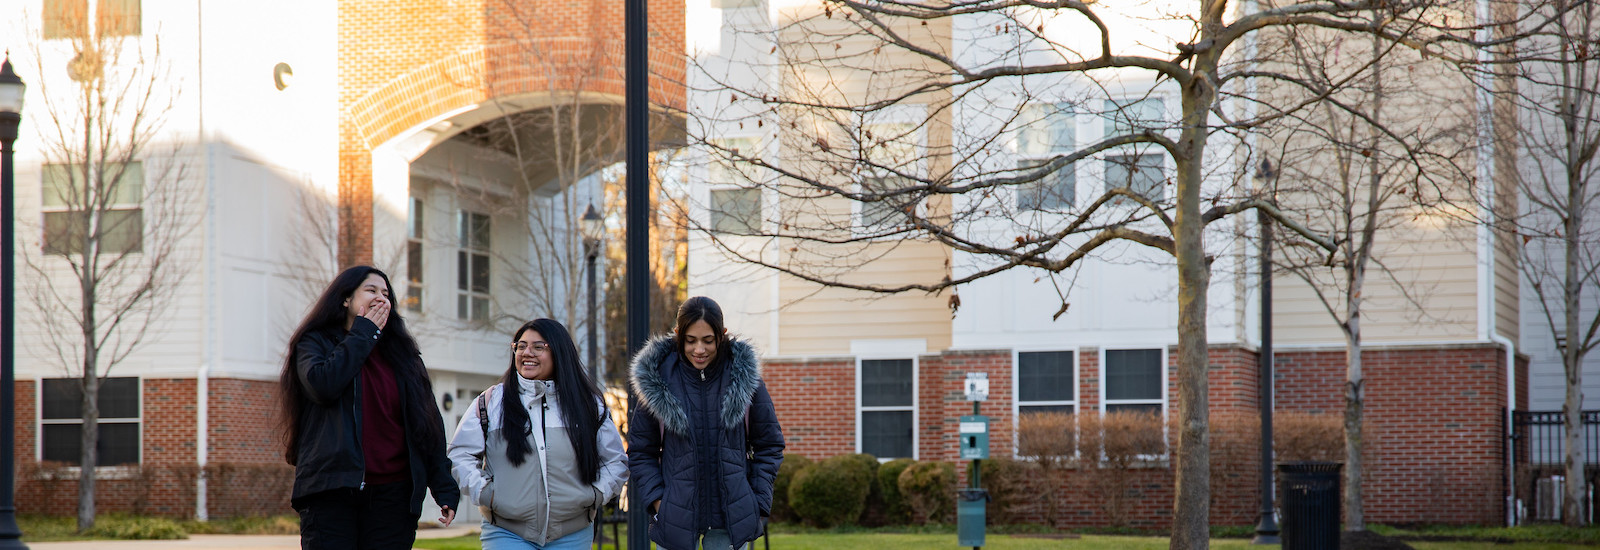 Rosa walks with two friends through campus.